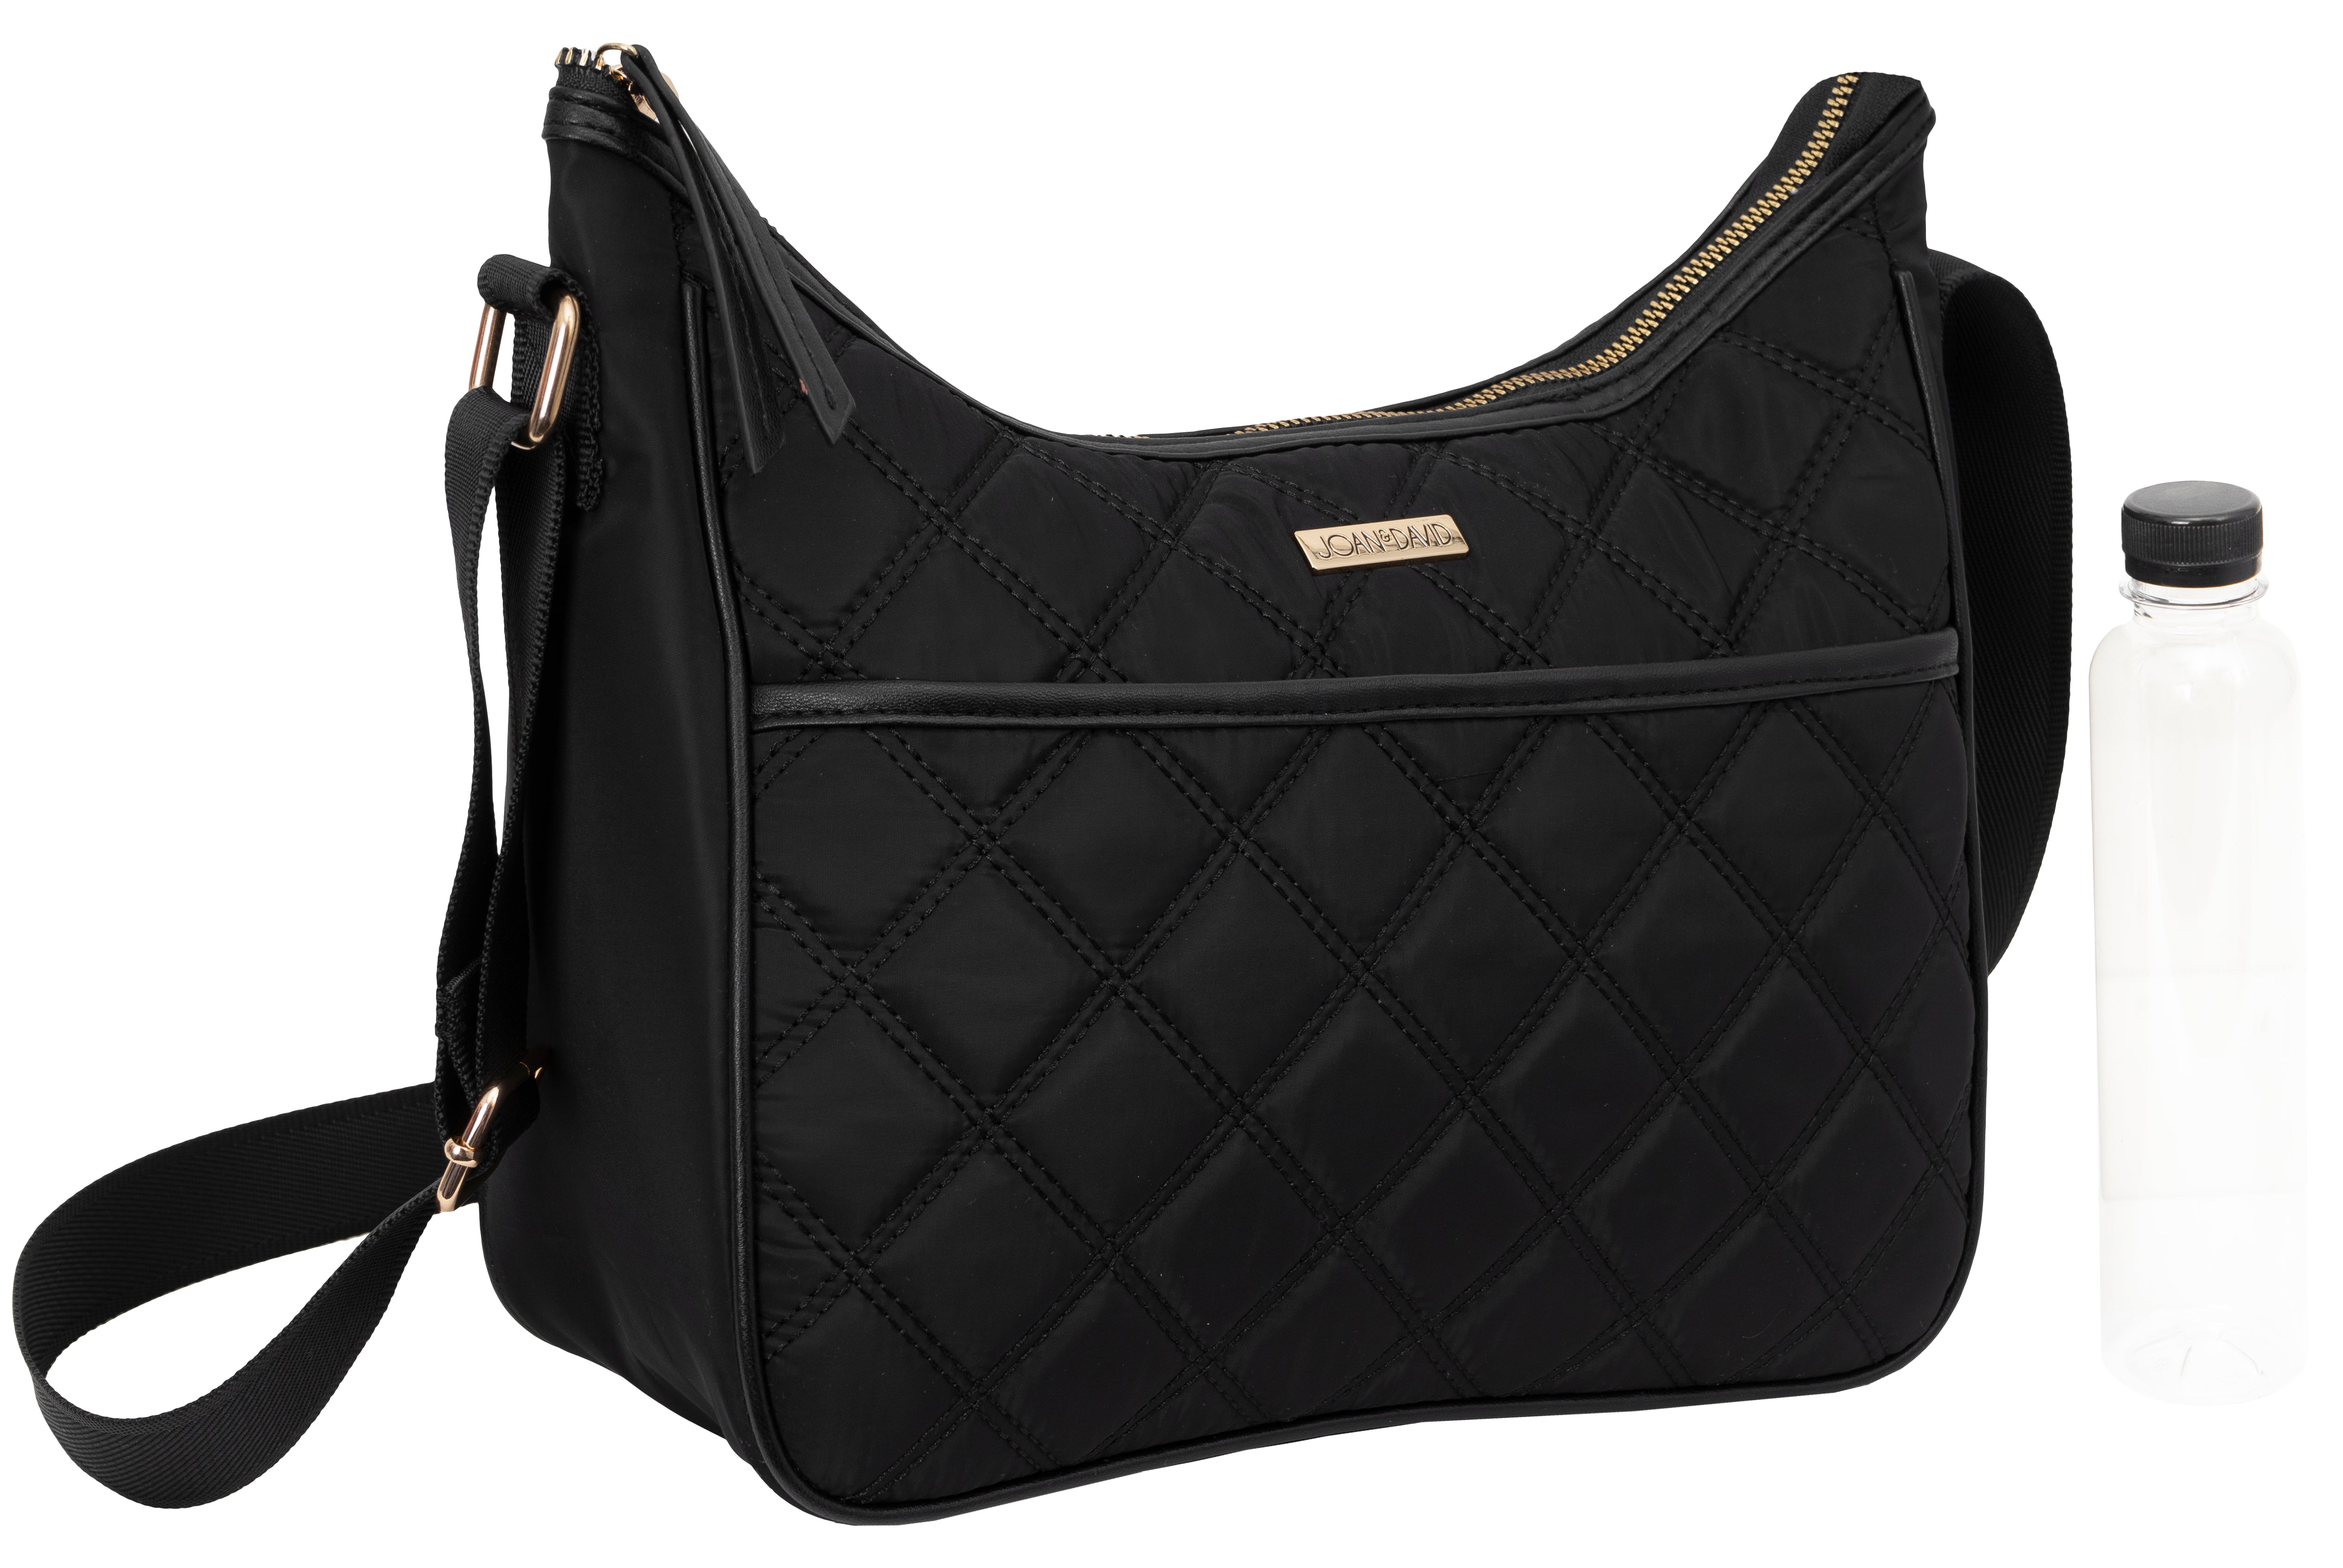 title:Joan & David Diamond Quilted Crossbody Nylon Cooler Lunch Tote With Re-Usable Bottle;color:Black